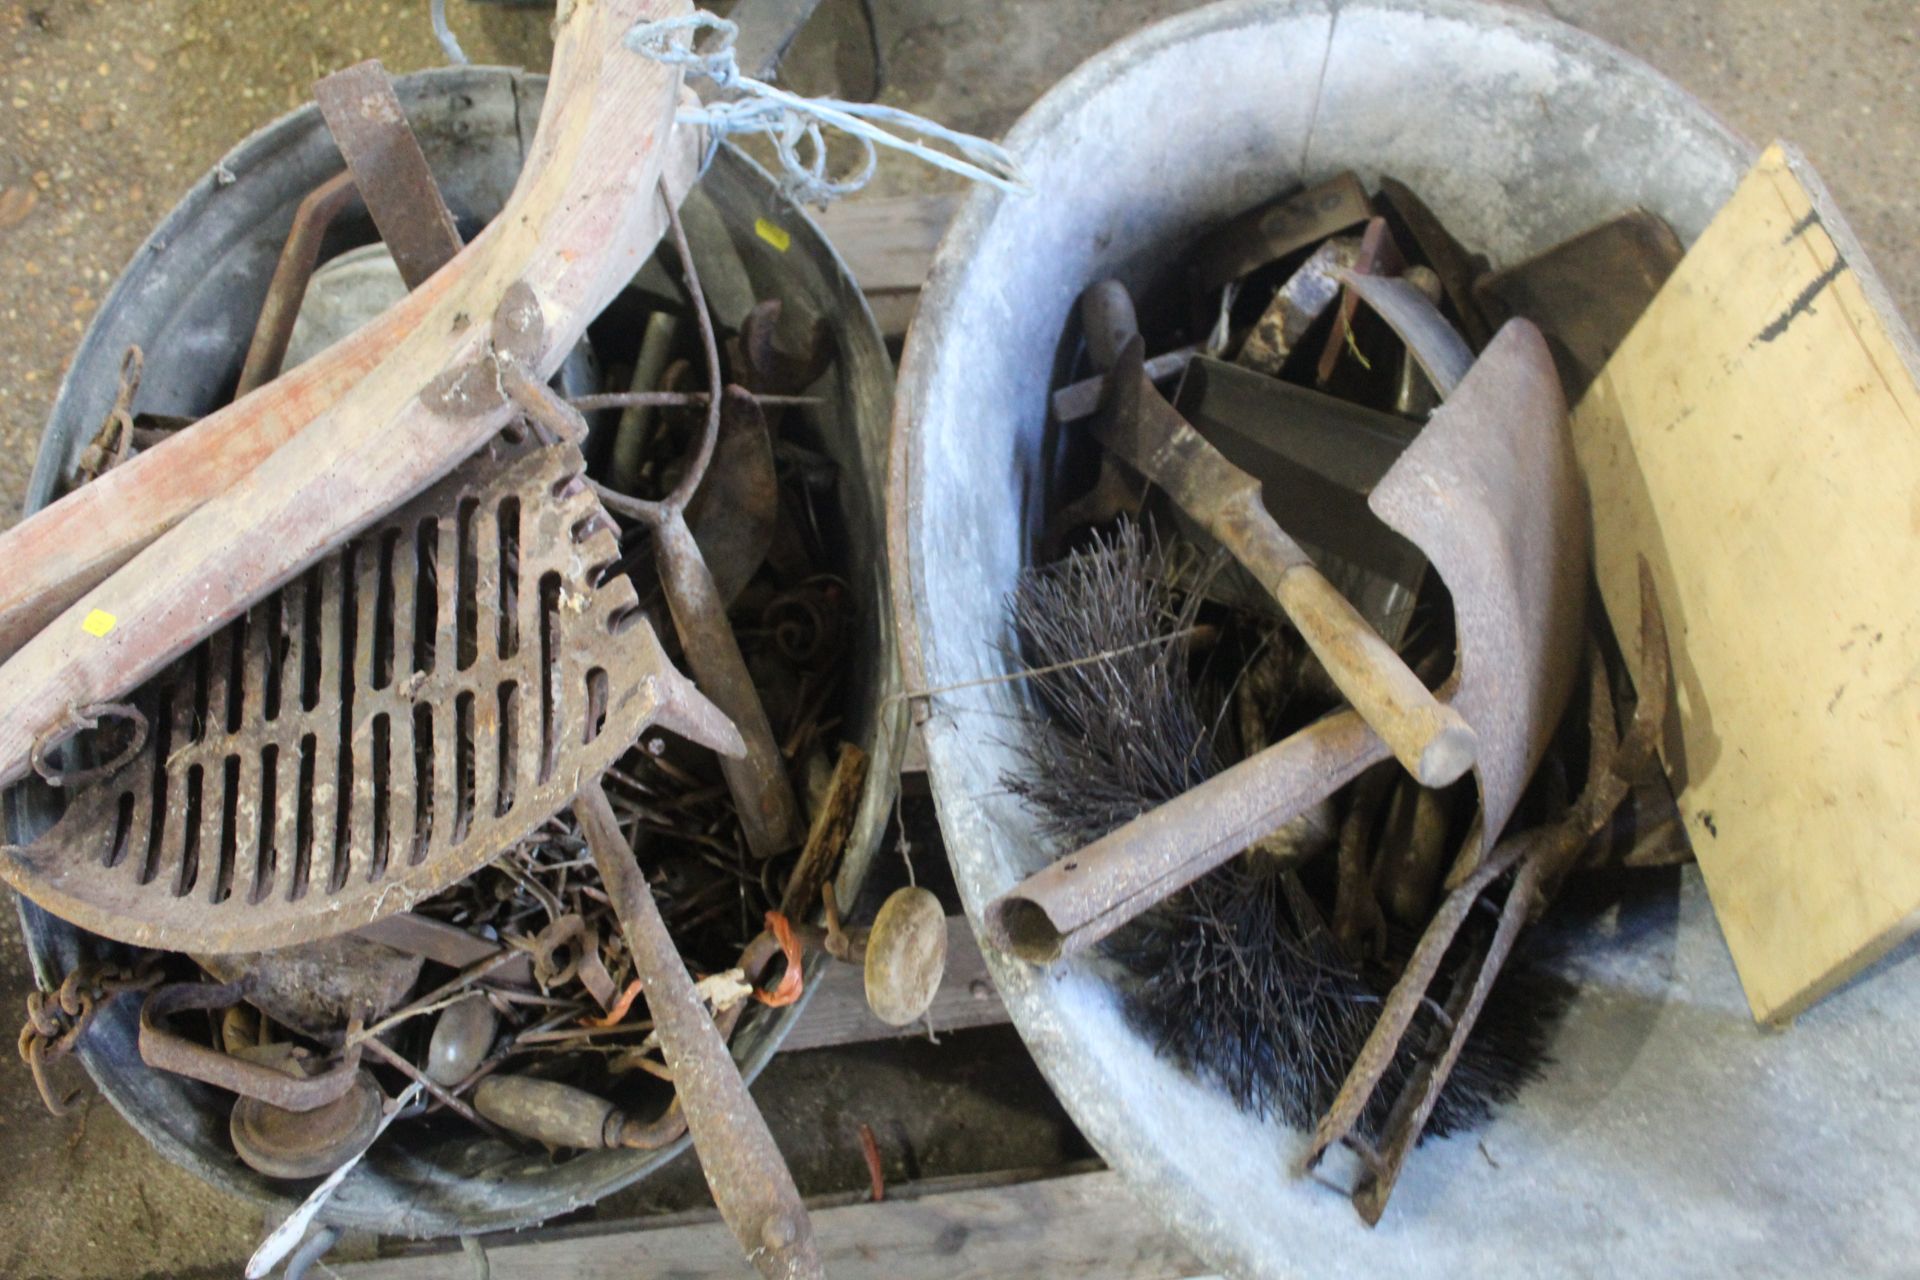 2x galvanised baths with contents of bygones. - Image 2 of 2